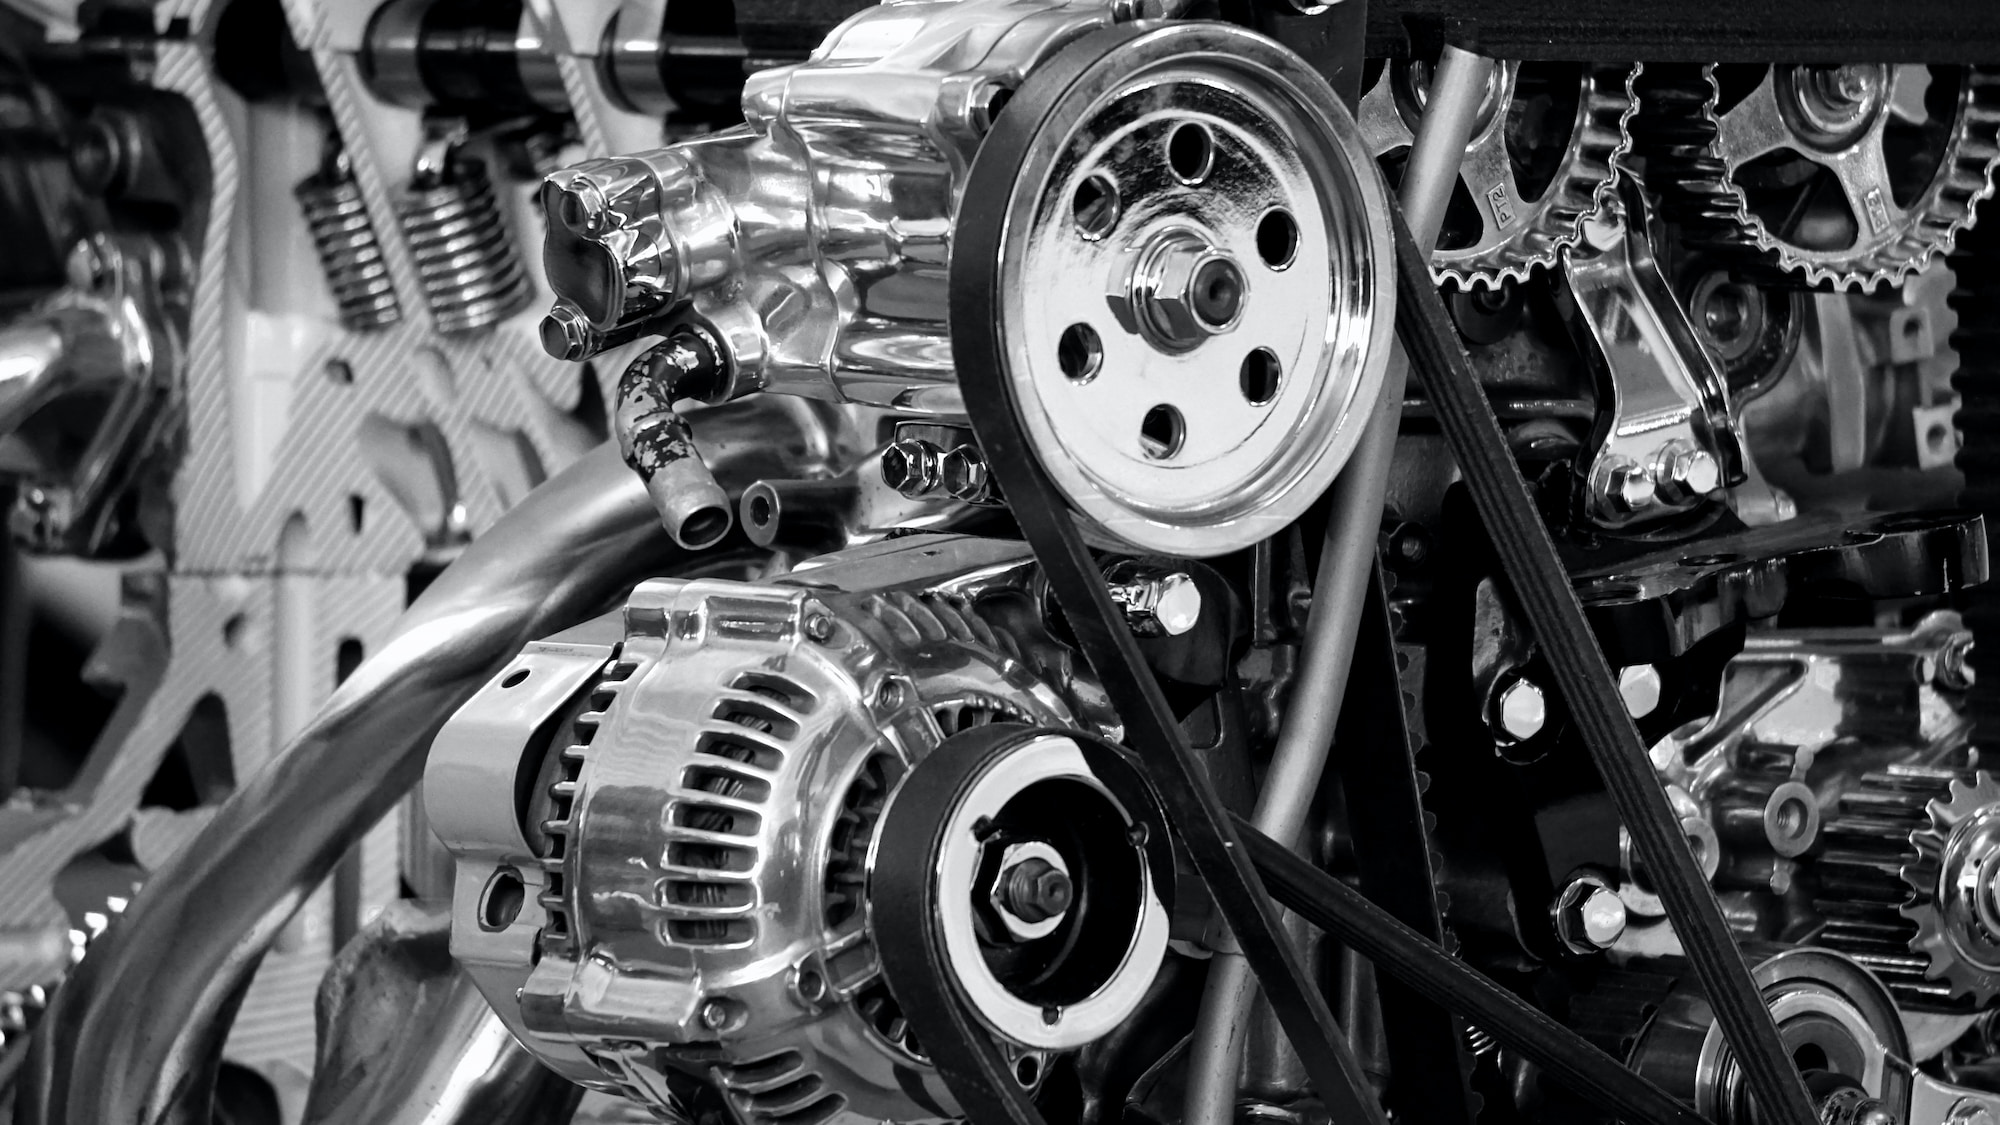 Truck engine black and white